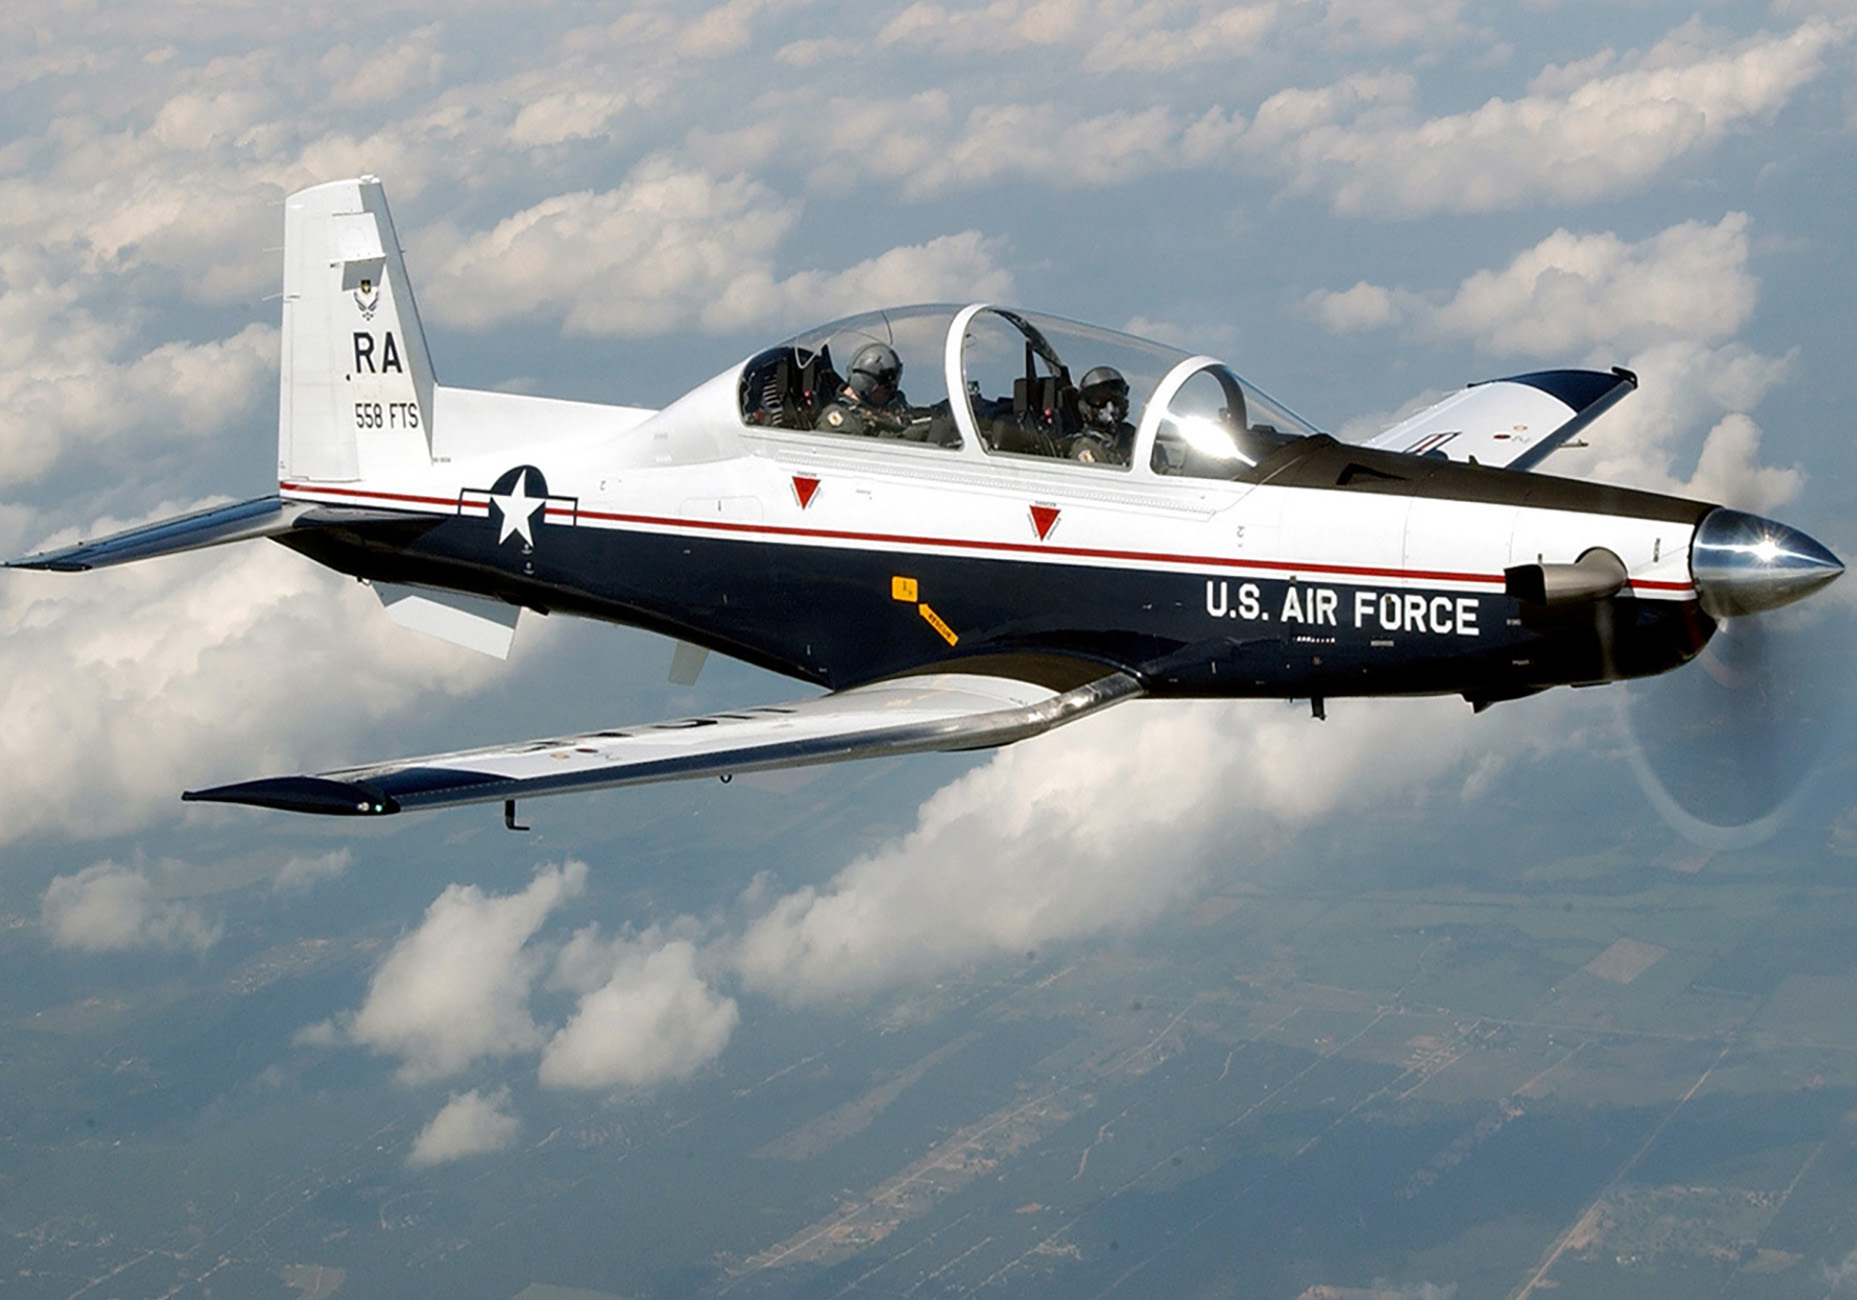 T-6 Makes Emergency ‘Belly Flop’ Landing, No Injuries Reported